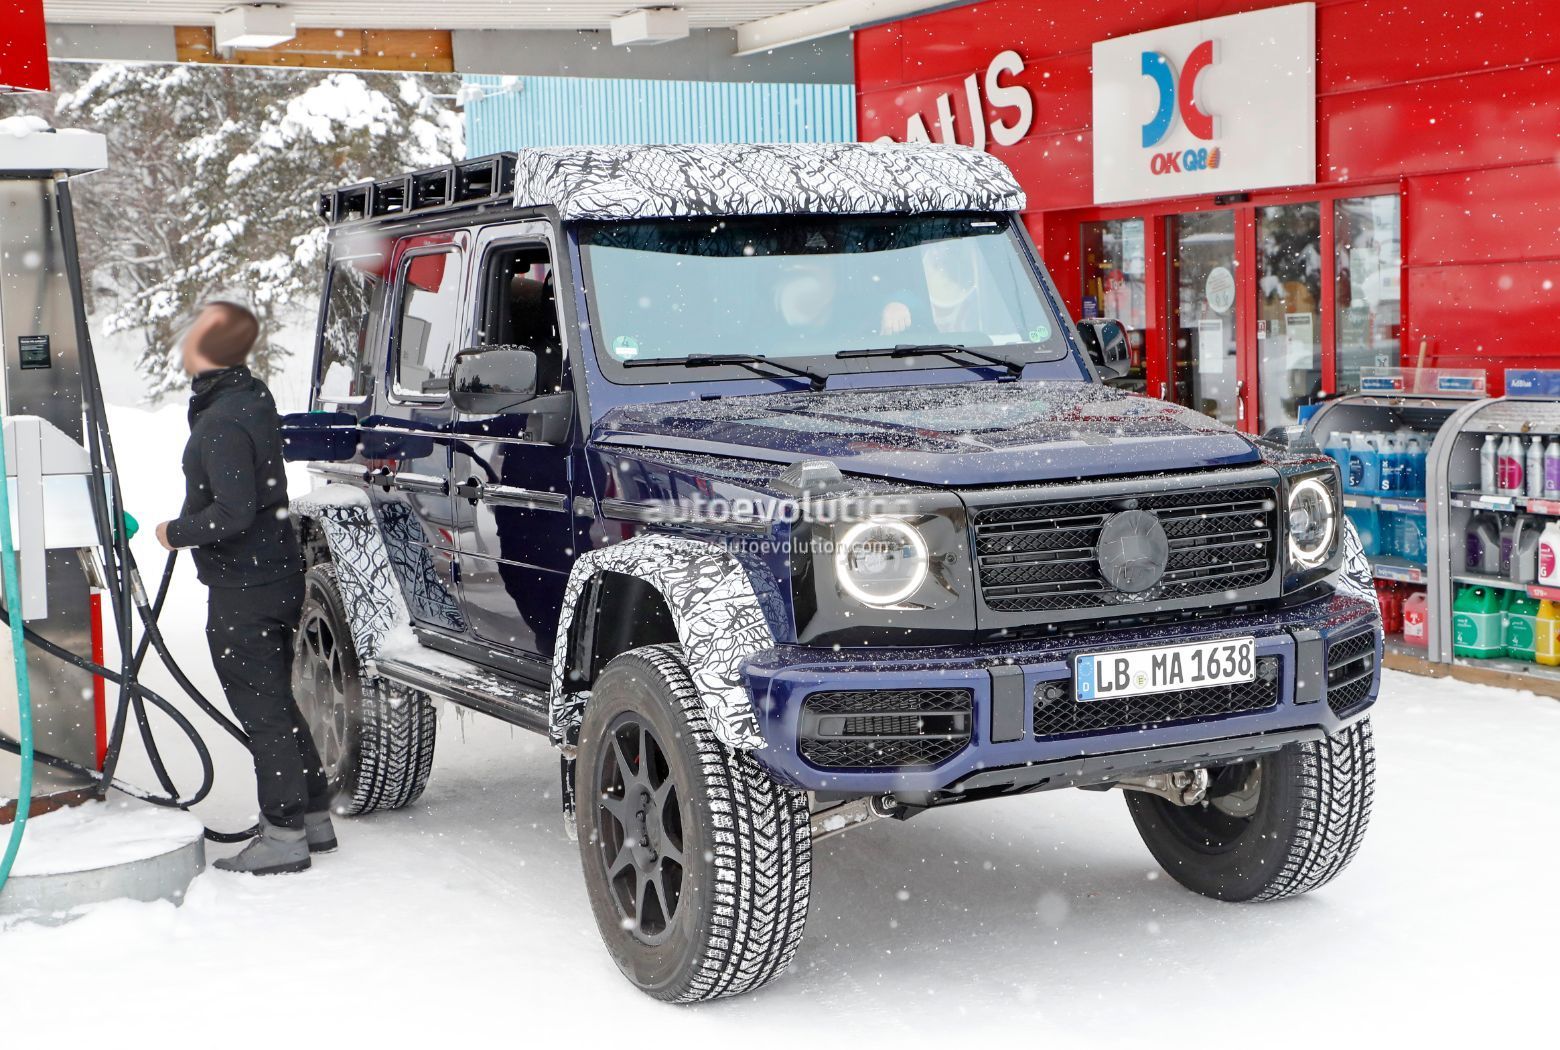 22 Mercedes Benz G Class 4x4 Squared Prototype Makes Everything Look Tiny Autoevolution